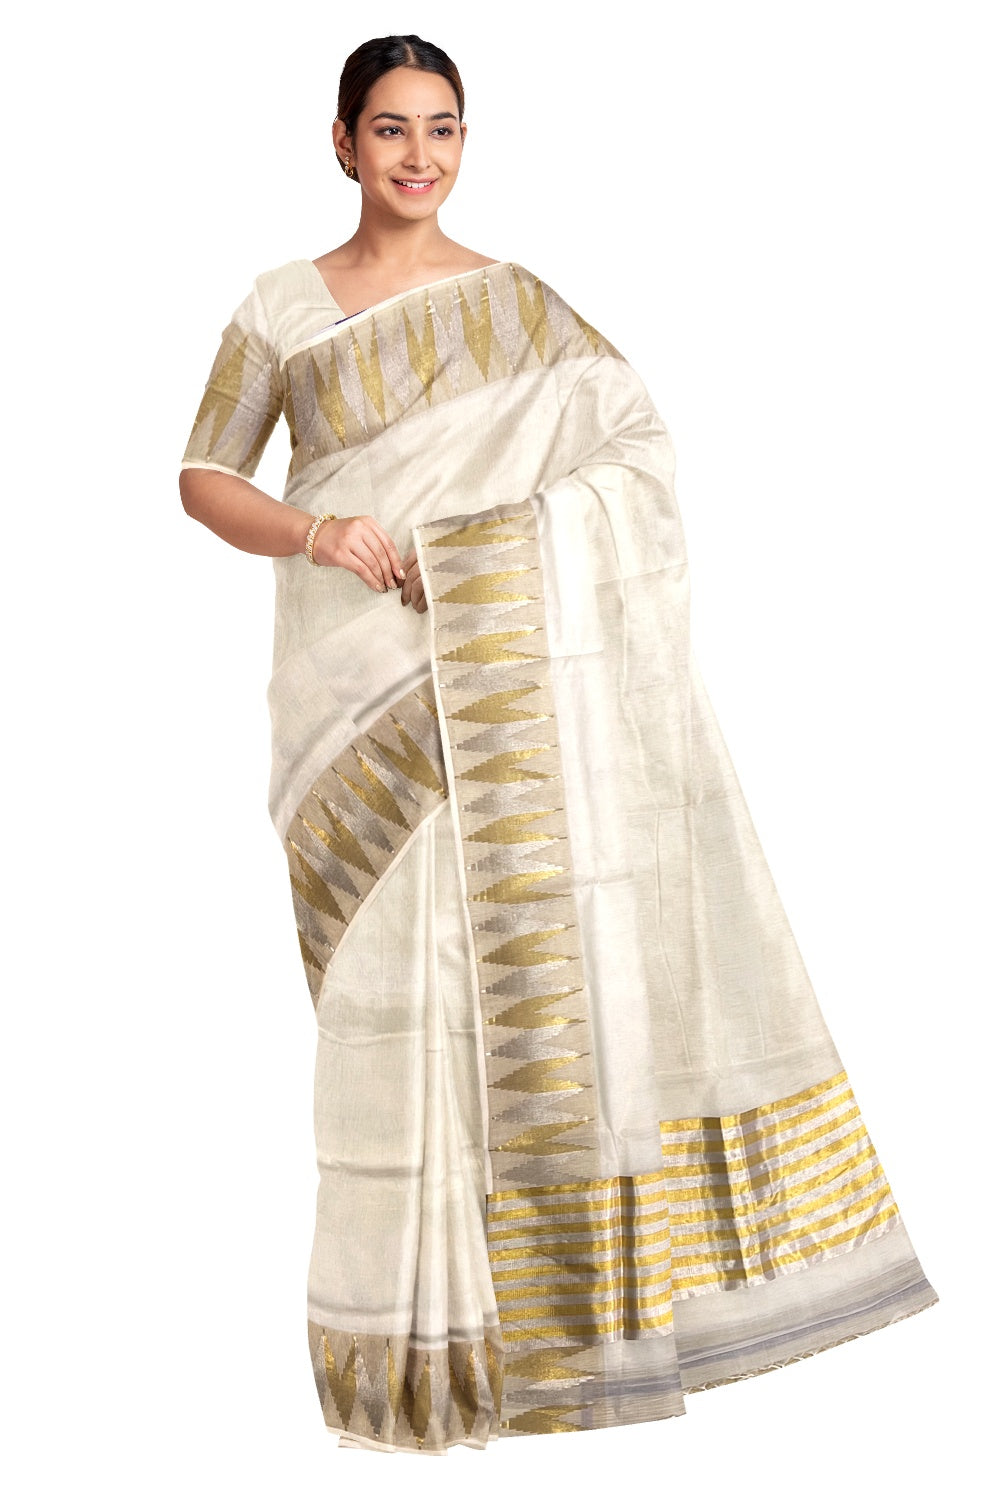 Southloom™ Premium Handloom Kerala Saree with Golden and Silver Woven Temple Border